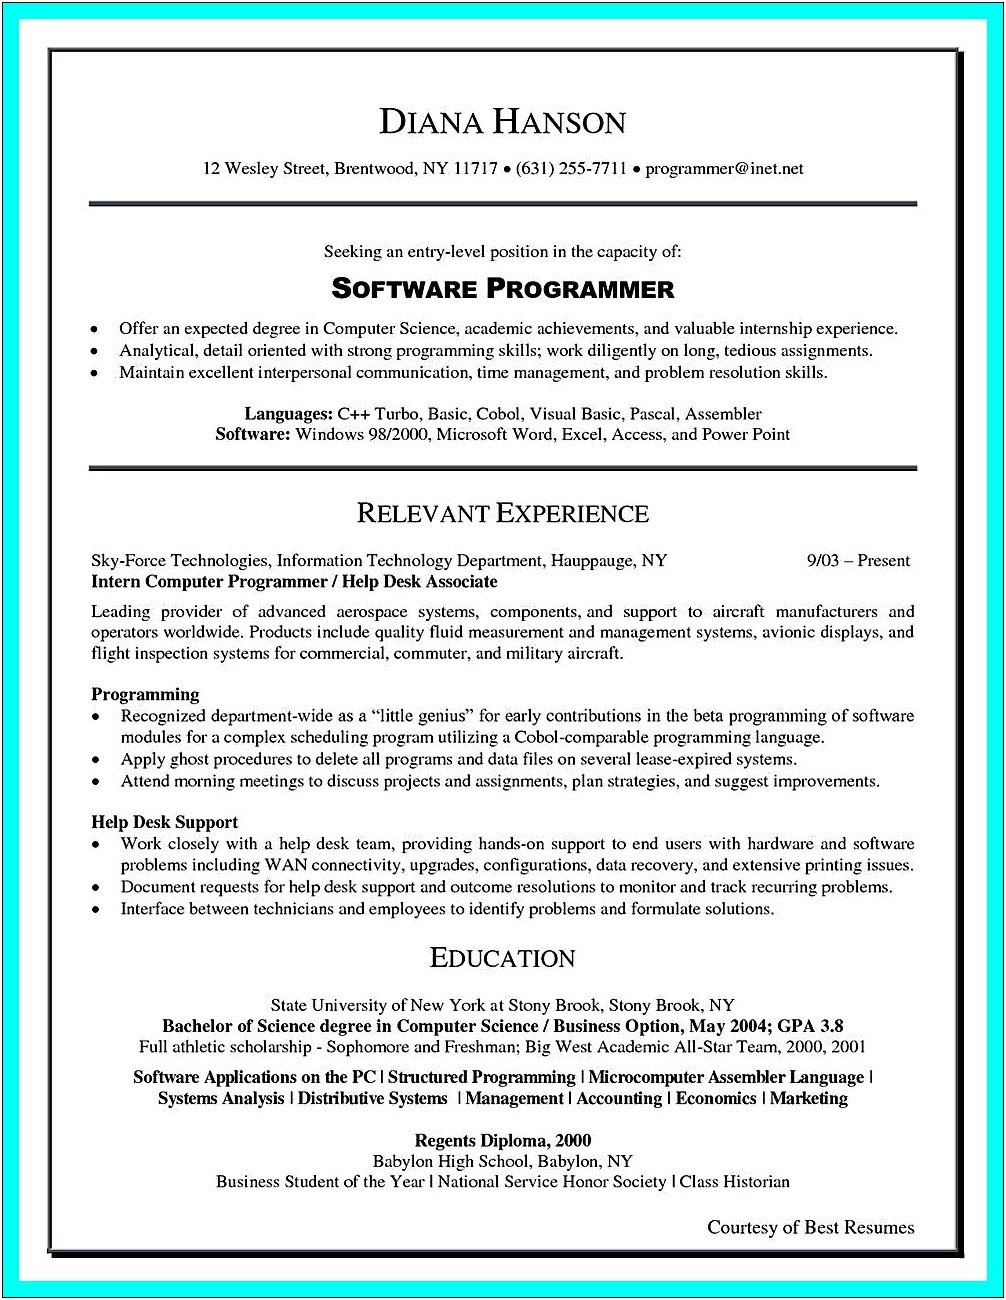 Experience With Computer To Put On A Resume